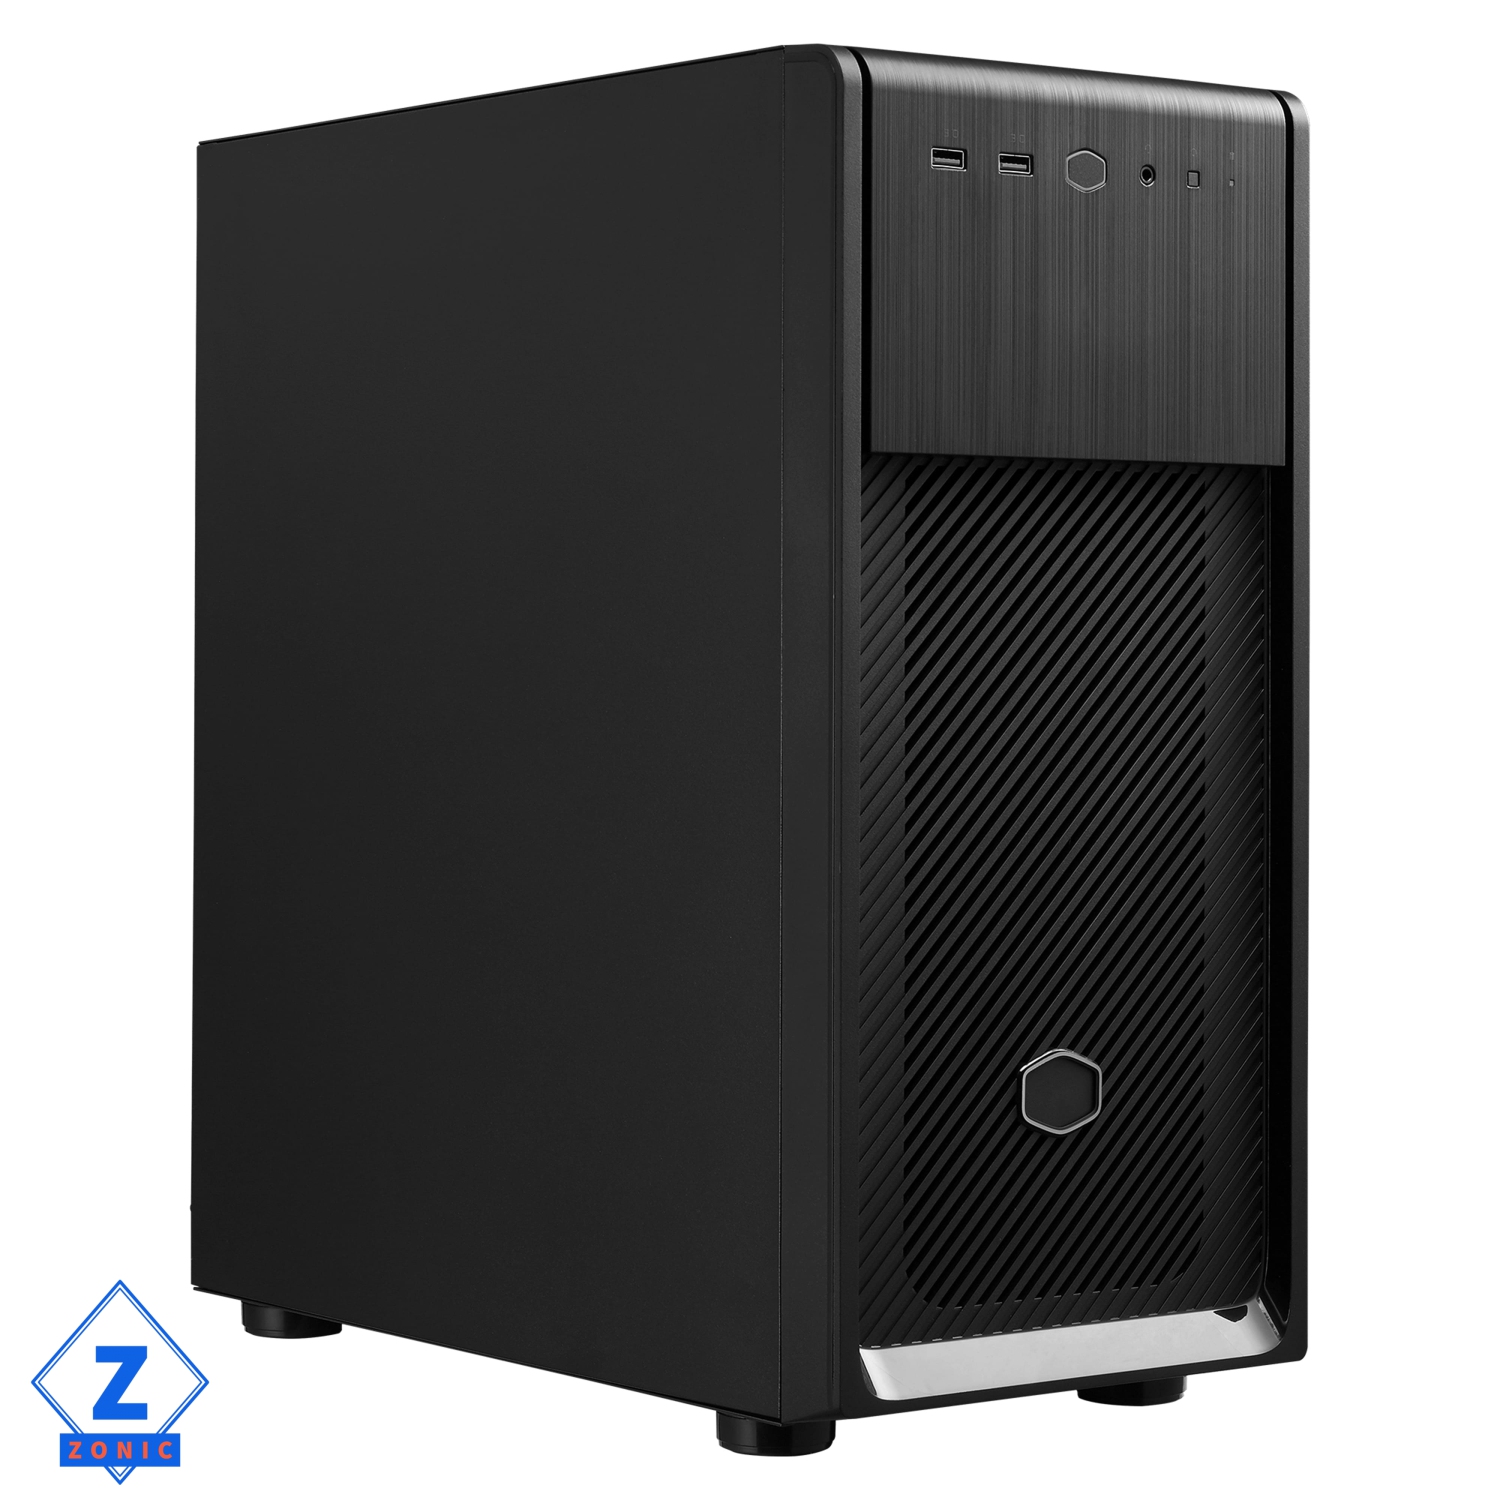 Zonic Business Custom PC, Intel Core i9-12900K, 16 Cores, 2 TB NVME SSD, 32 GB DDR5 RAM, Built-in Wi-Fi, Keyboard, and Mouse, Windows 11 Pro